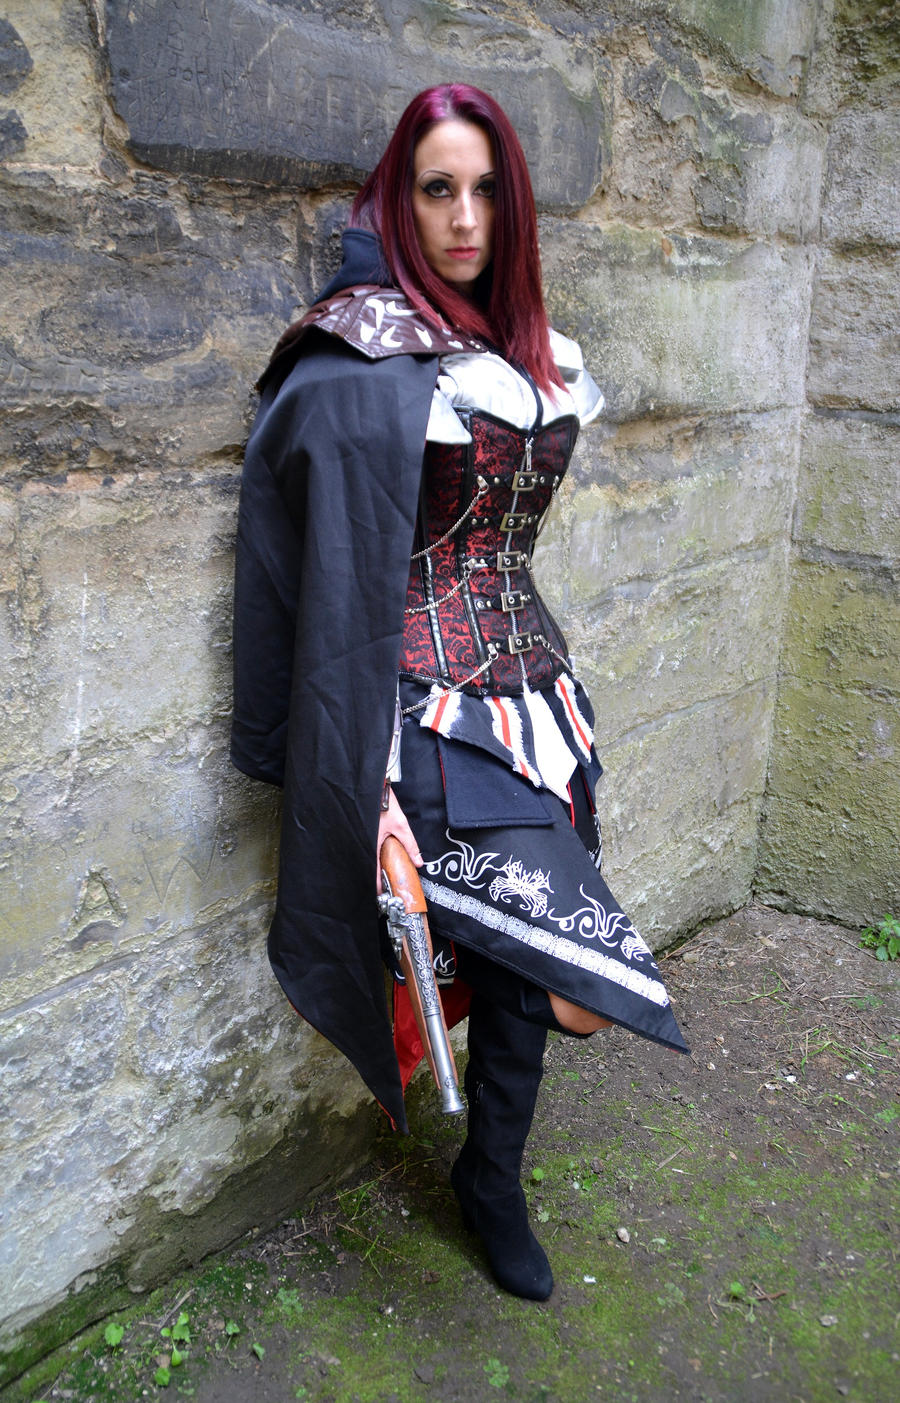 Female Assassin's Creed Cosplay (8) by masimage on DeviantArt